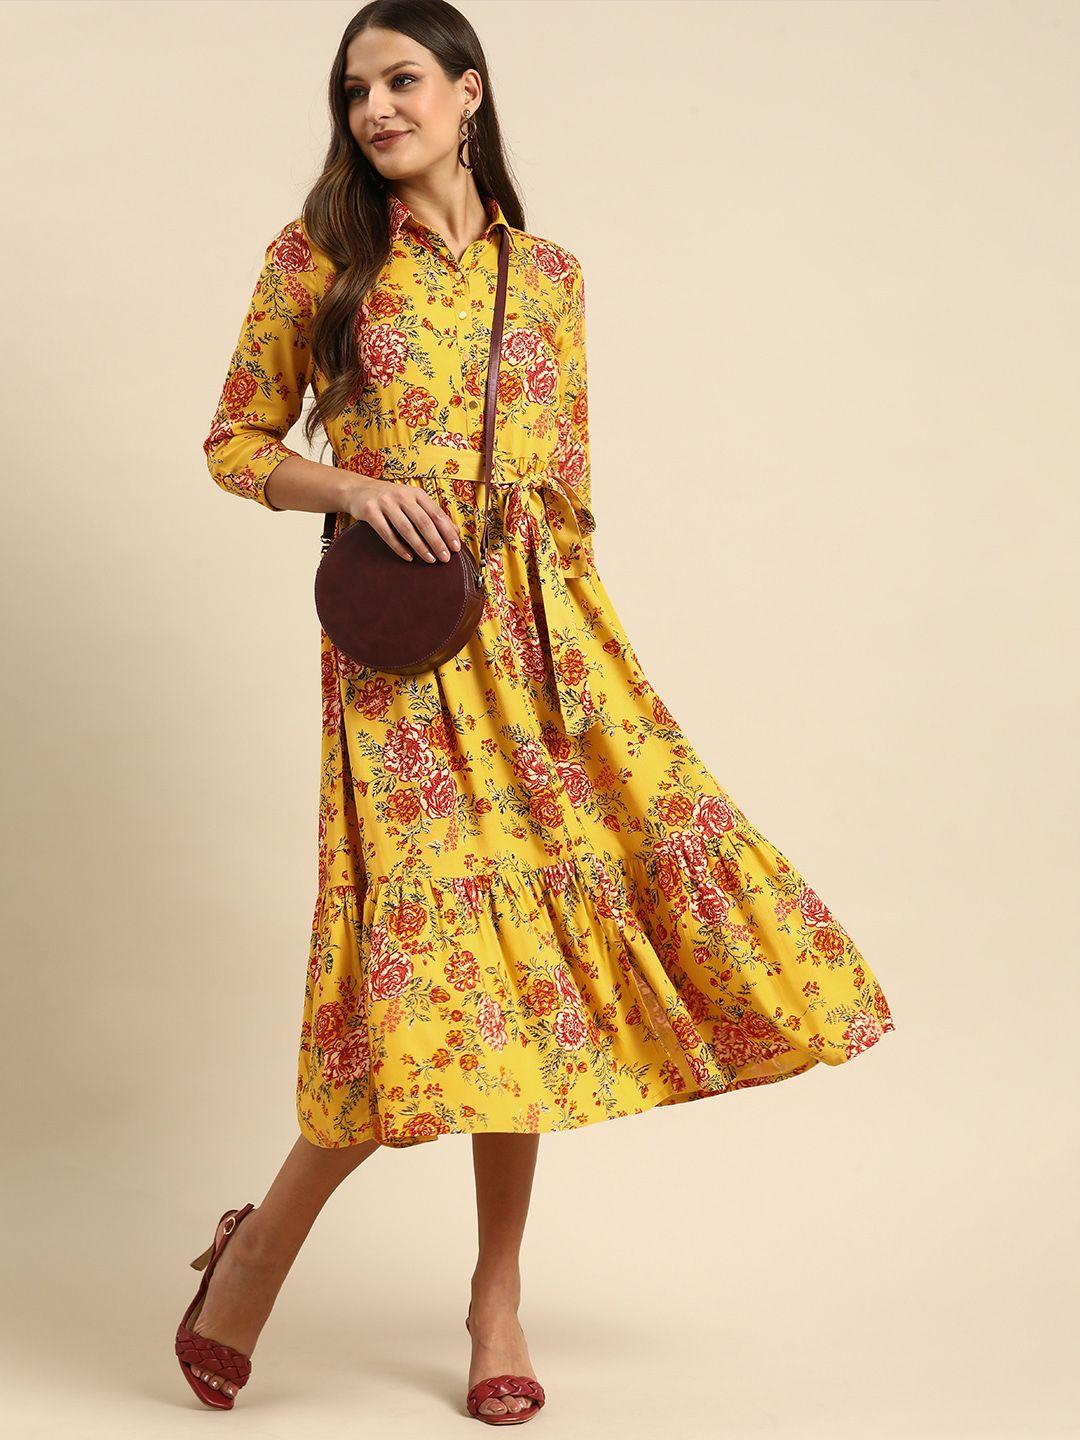 all about you mustard yellow & maroon tropical shirt tiered midi dress with a belt